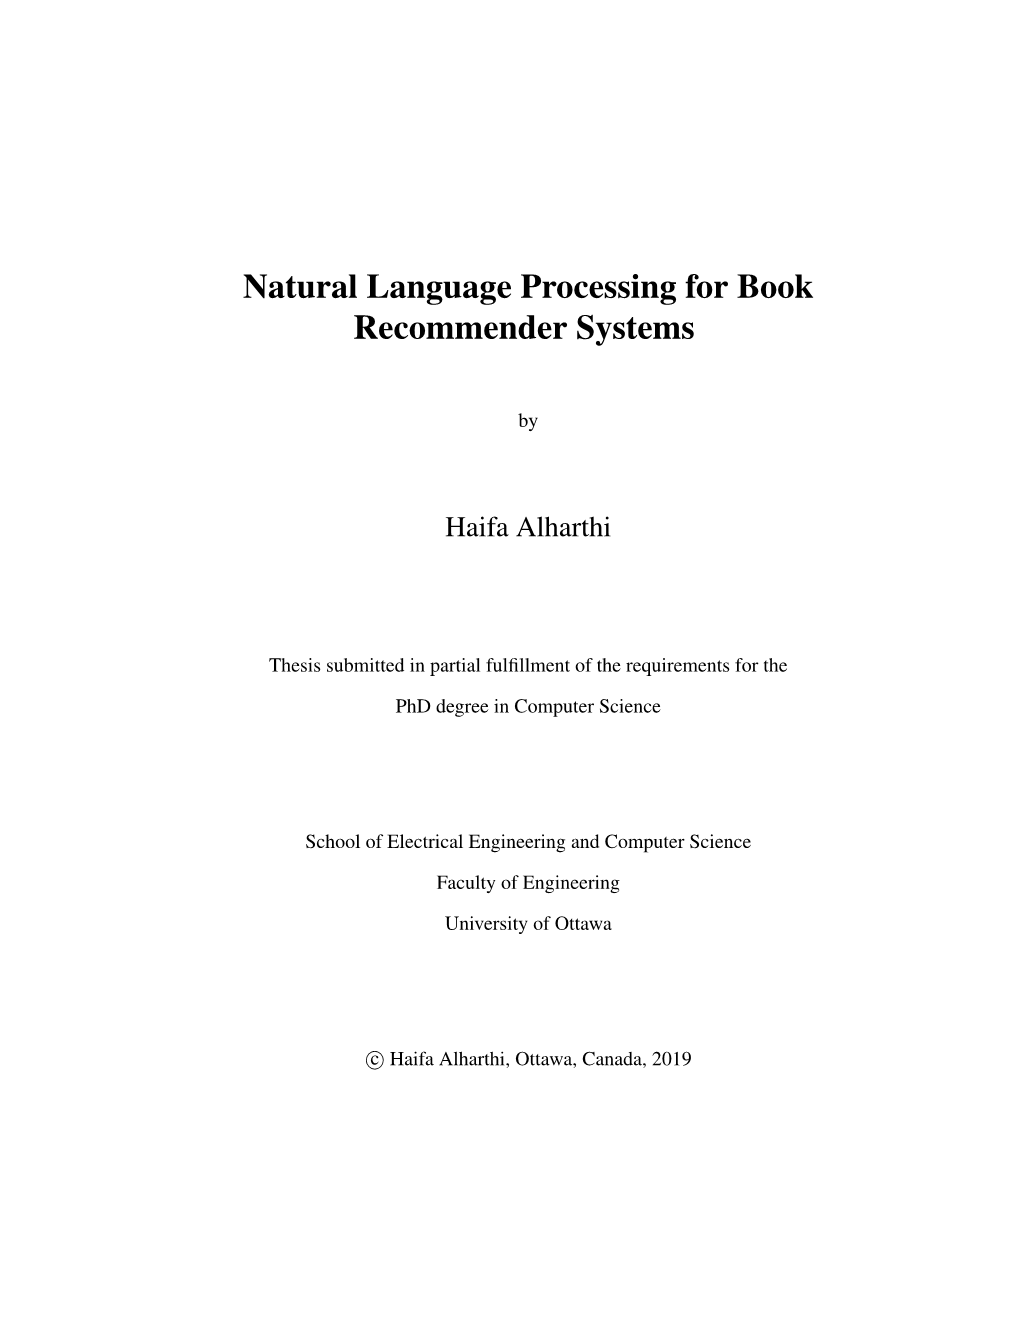 Natural Language Processing for Book Recommender Systems